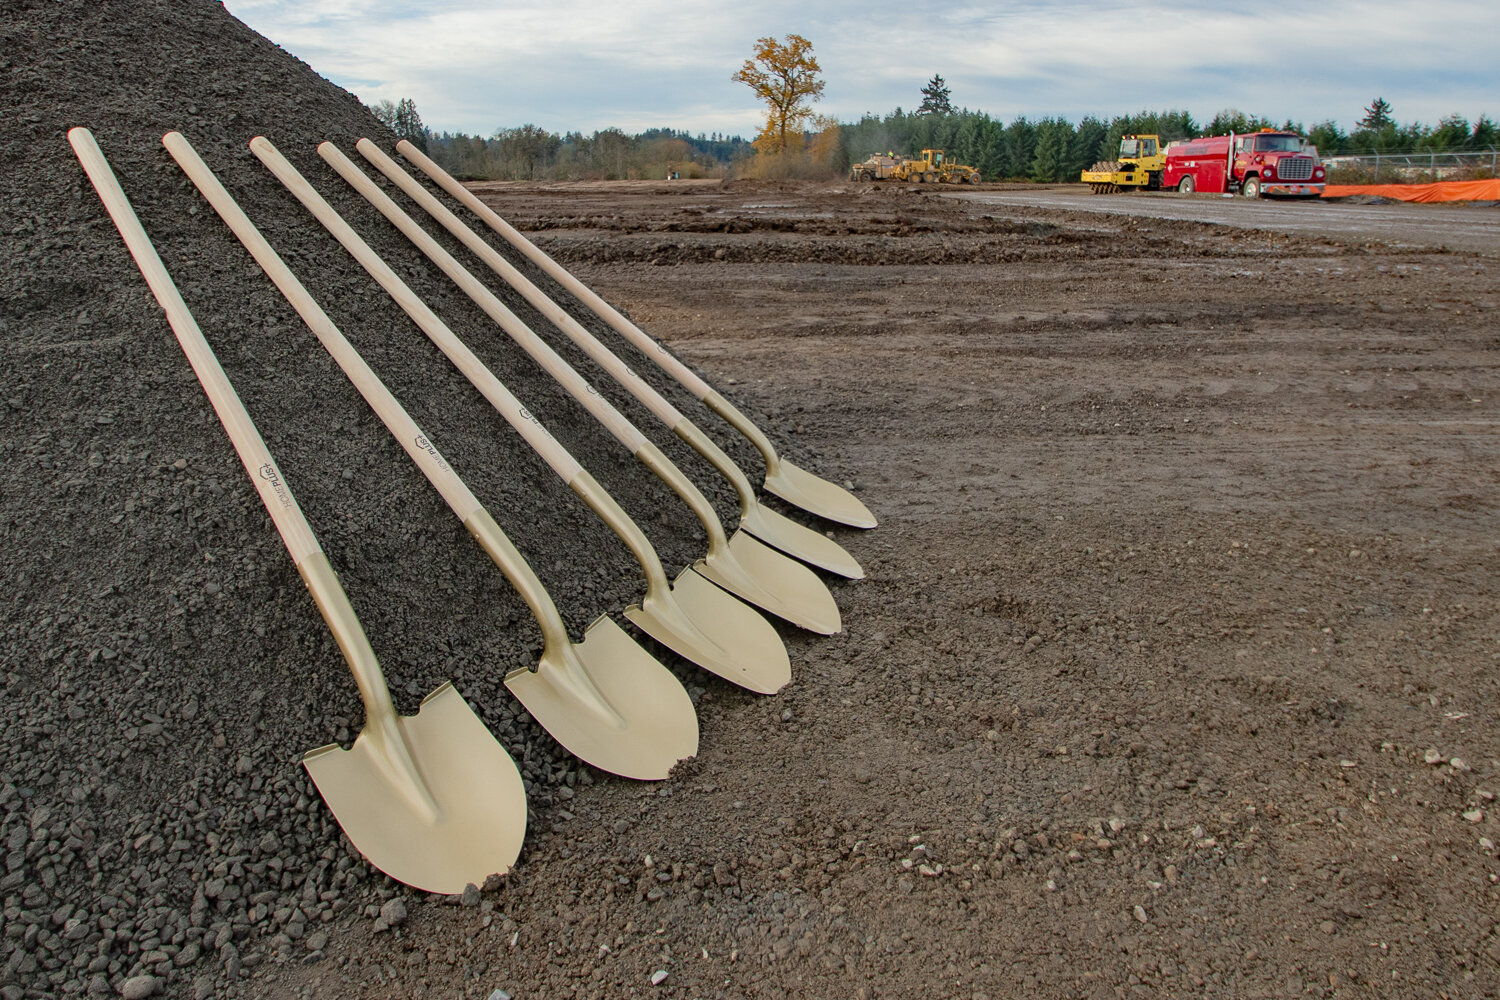 Ceremonial shovels are seen on Tuesday. Nov. 21, ahead of a groundbreaking ceremony marking the beginning of construction of a new TA truck stop in Napavine. Construction is expected to be completed by next Fall.